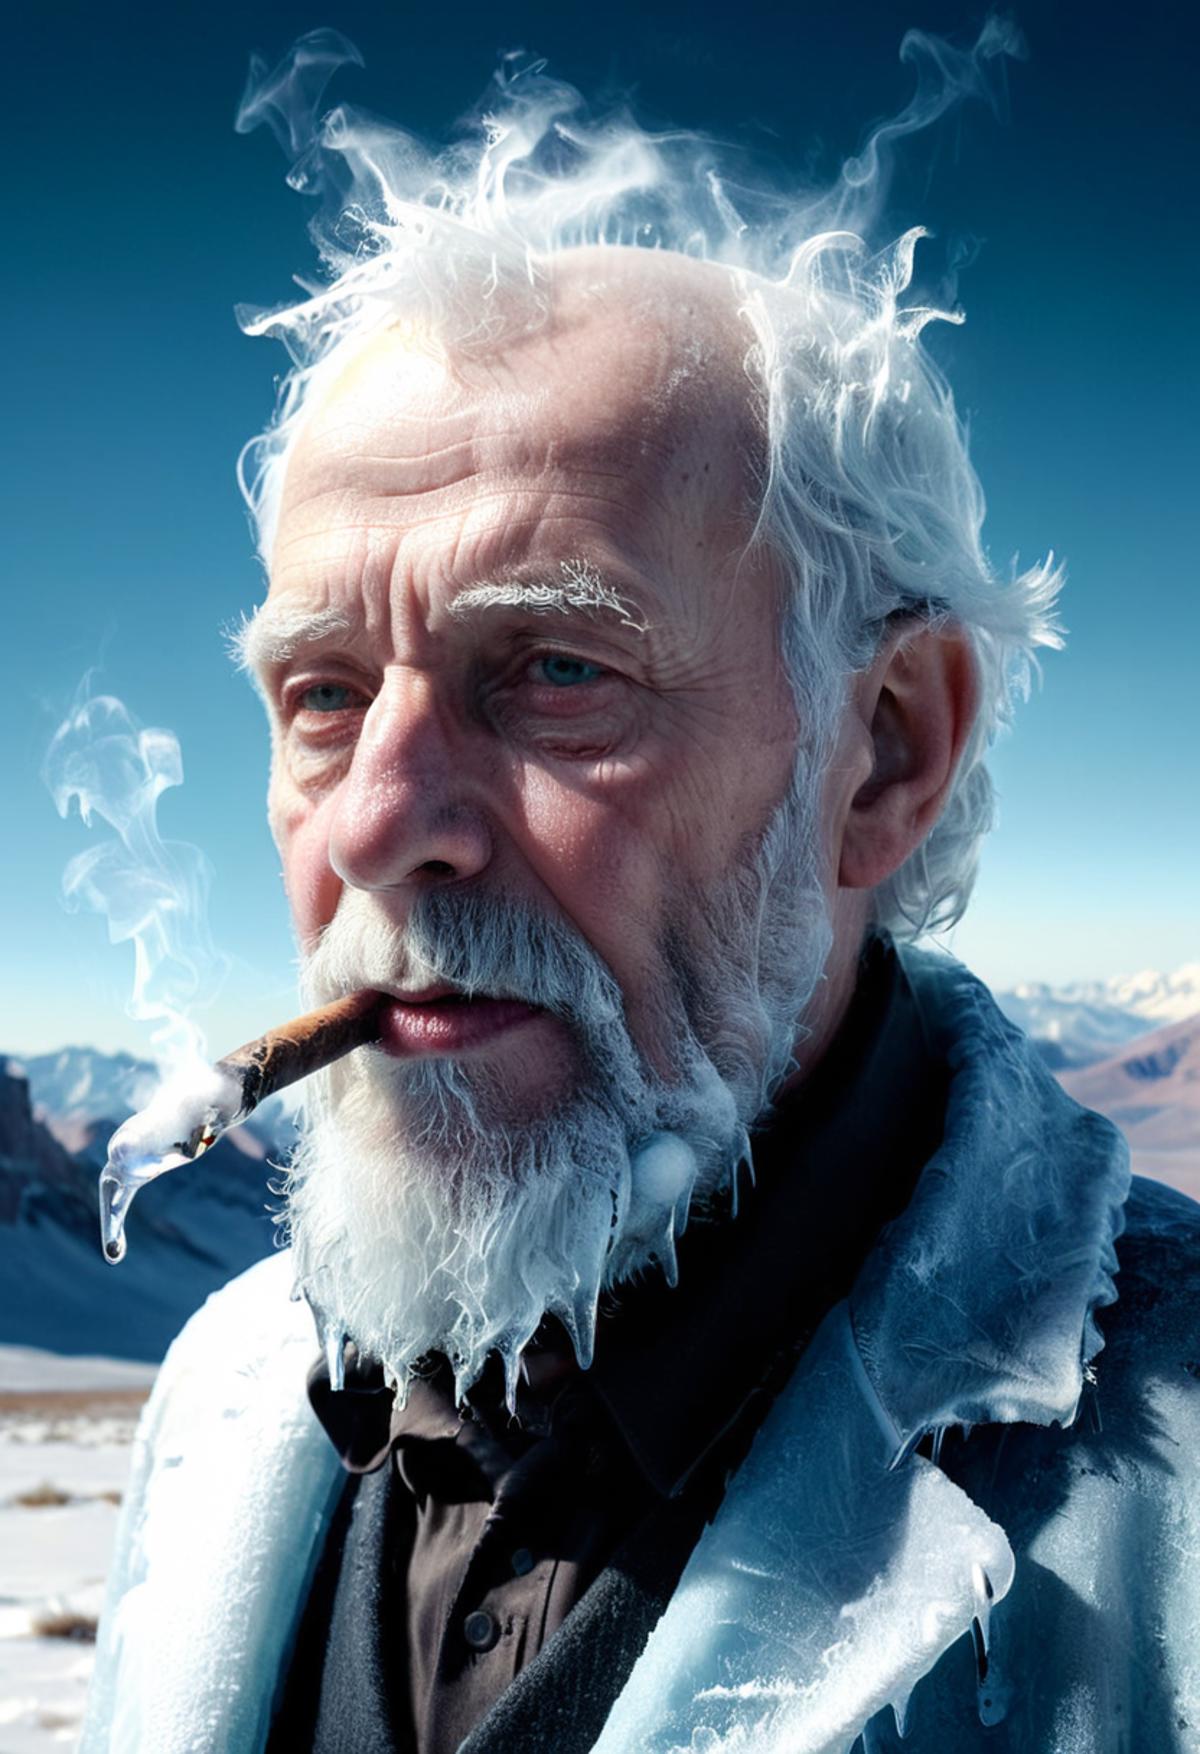 Old man smoking cigar in cold weather with snowy mountains in the background.